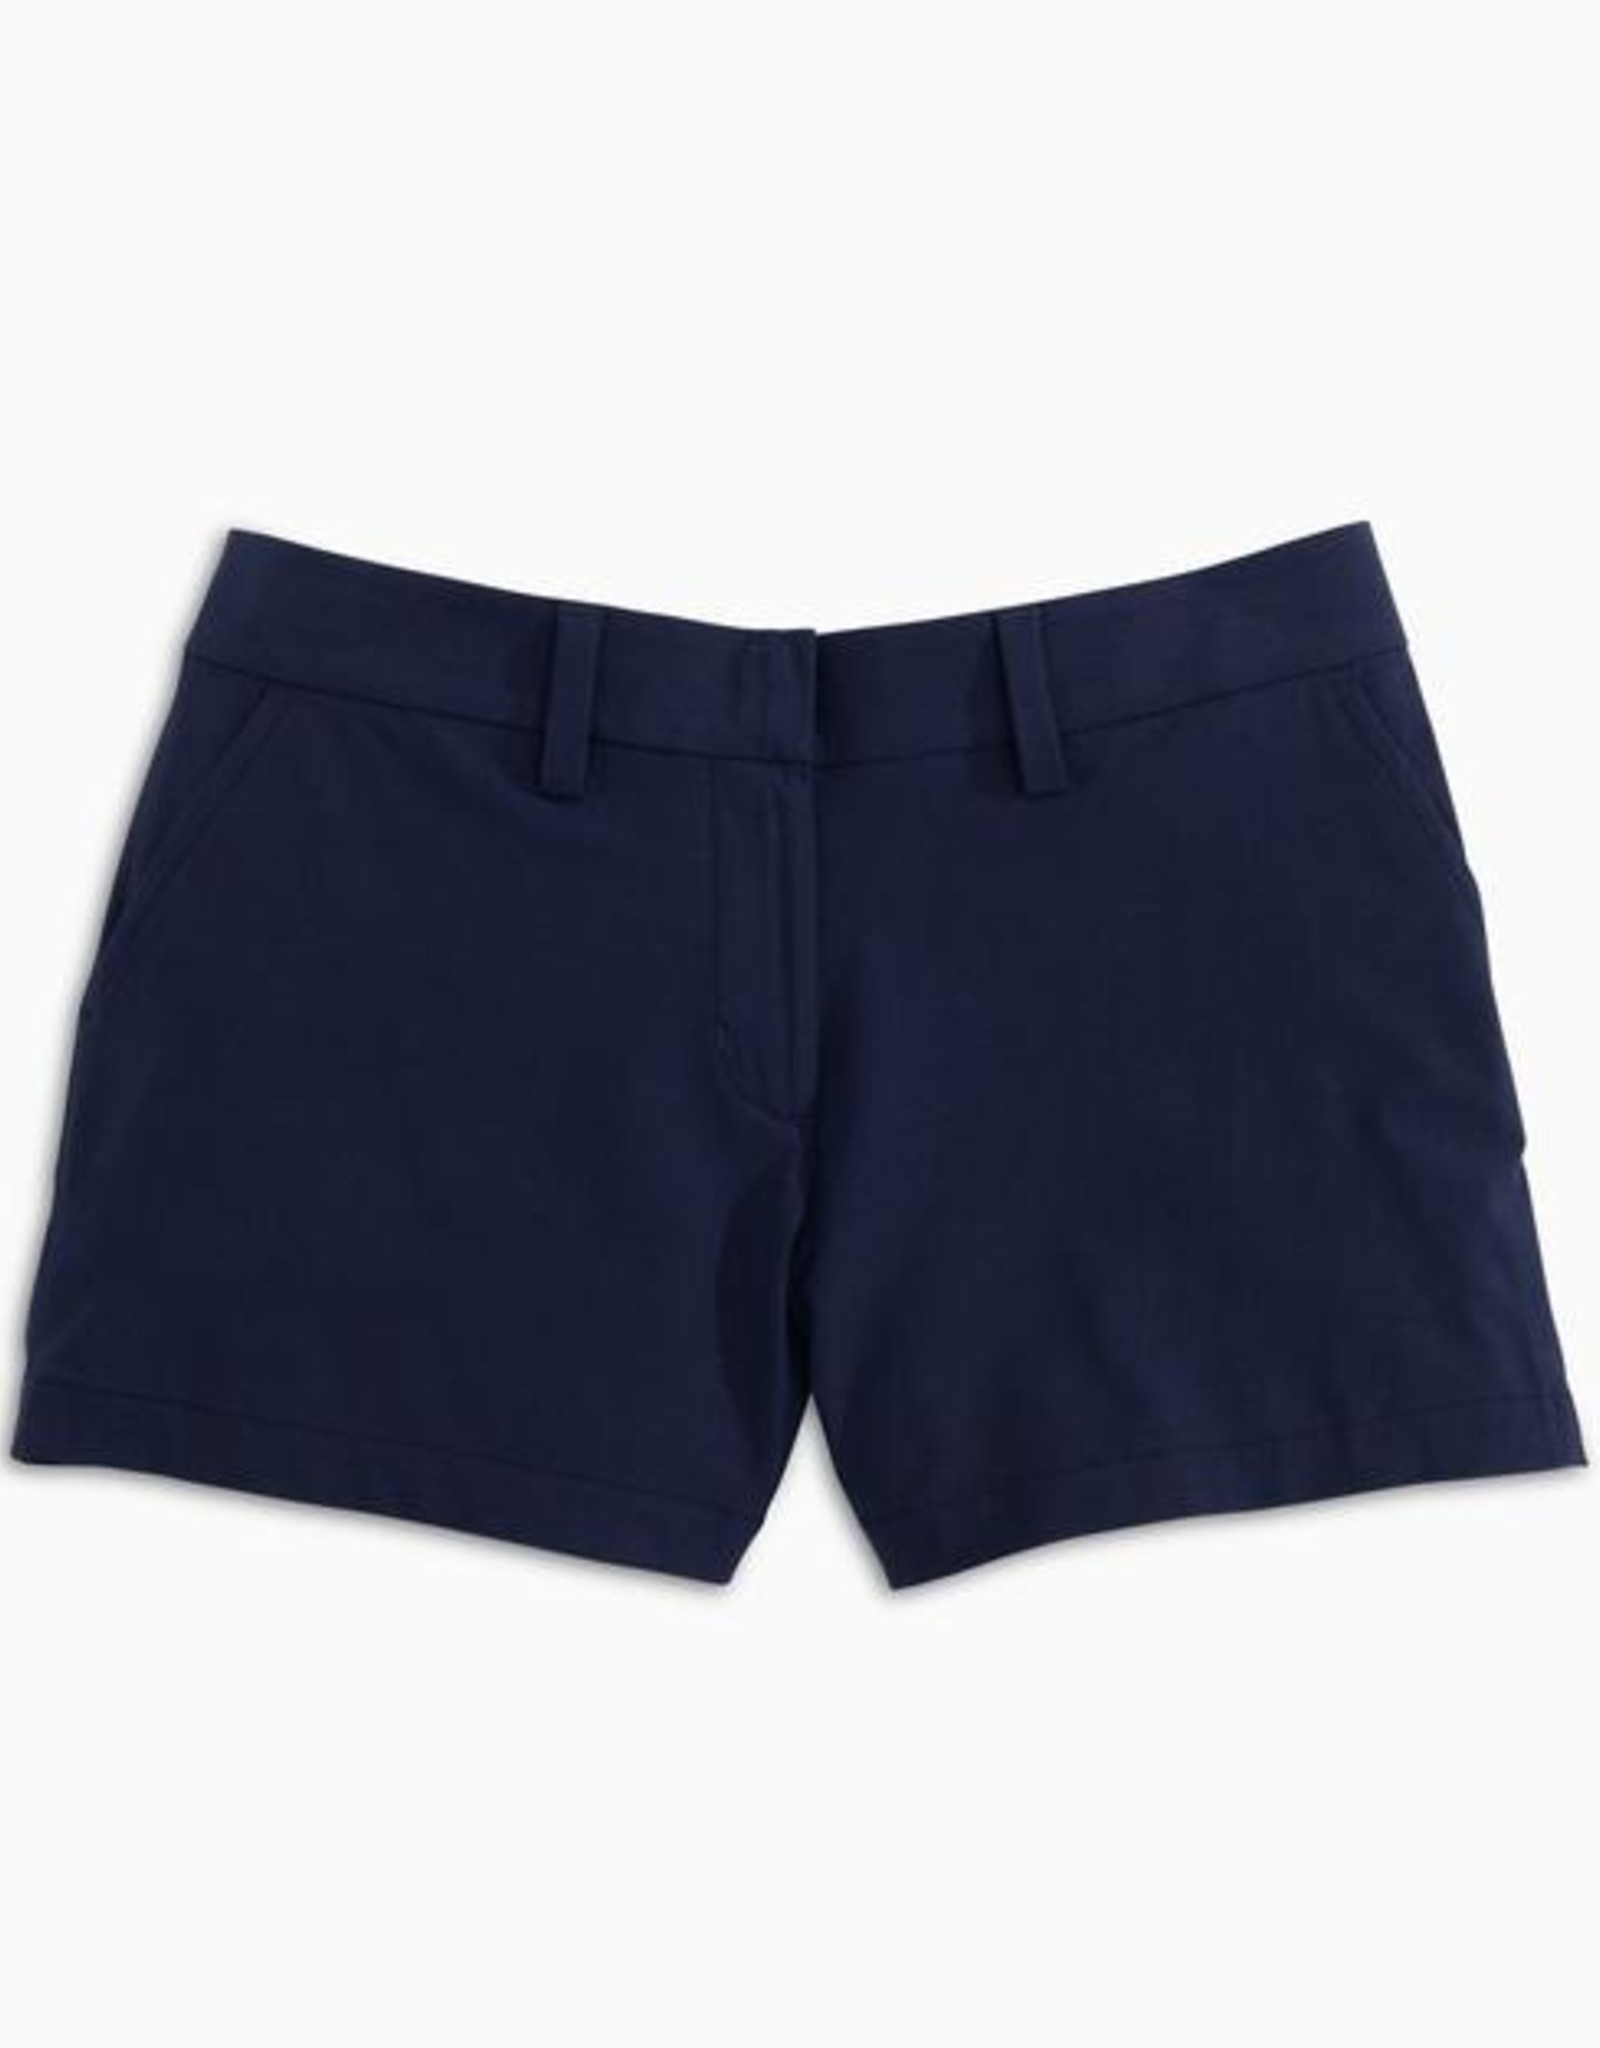 Southern Tide Southern Tide Inland Performance Shorts